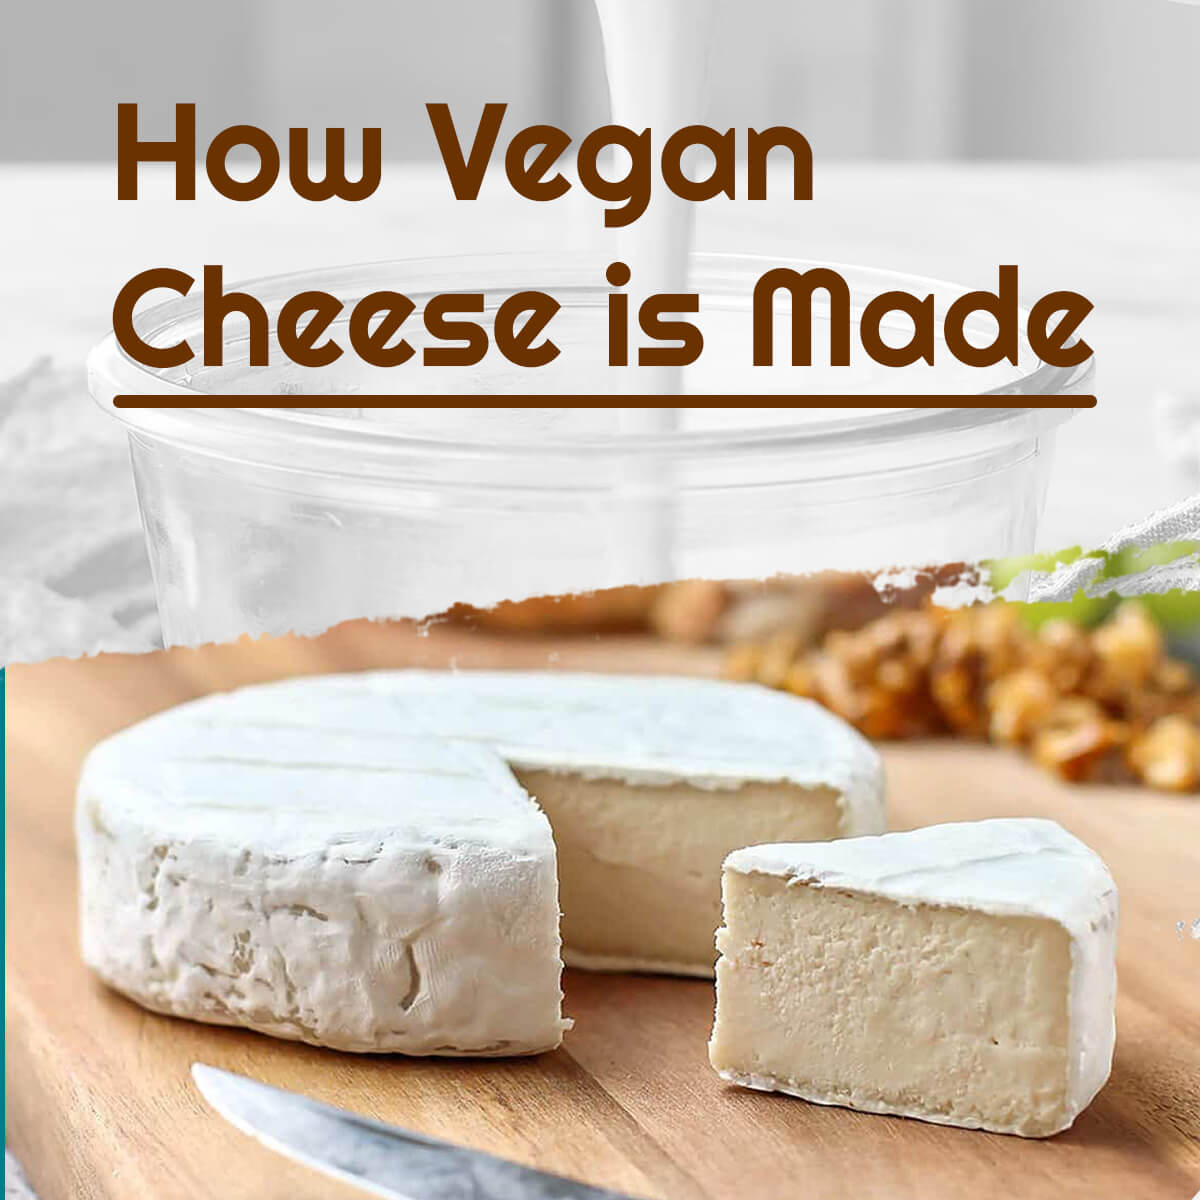 How Vegan Cheese is Made